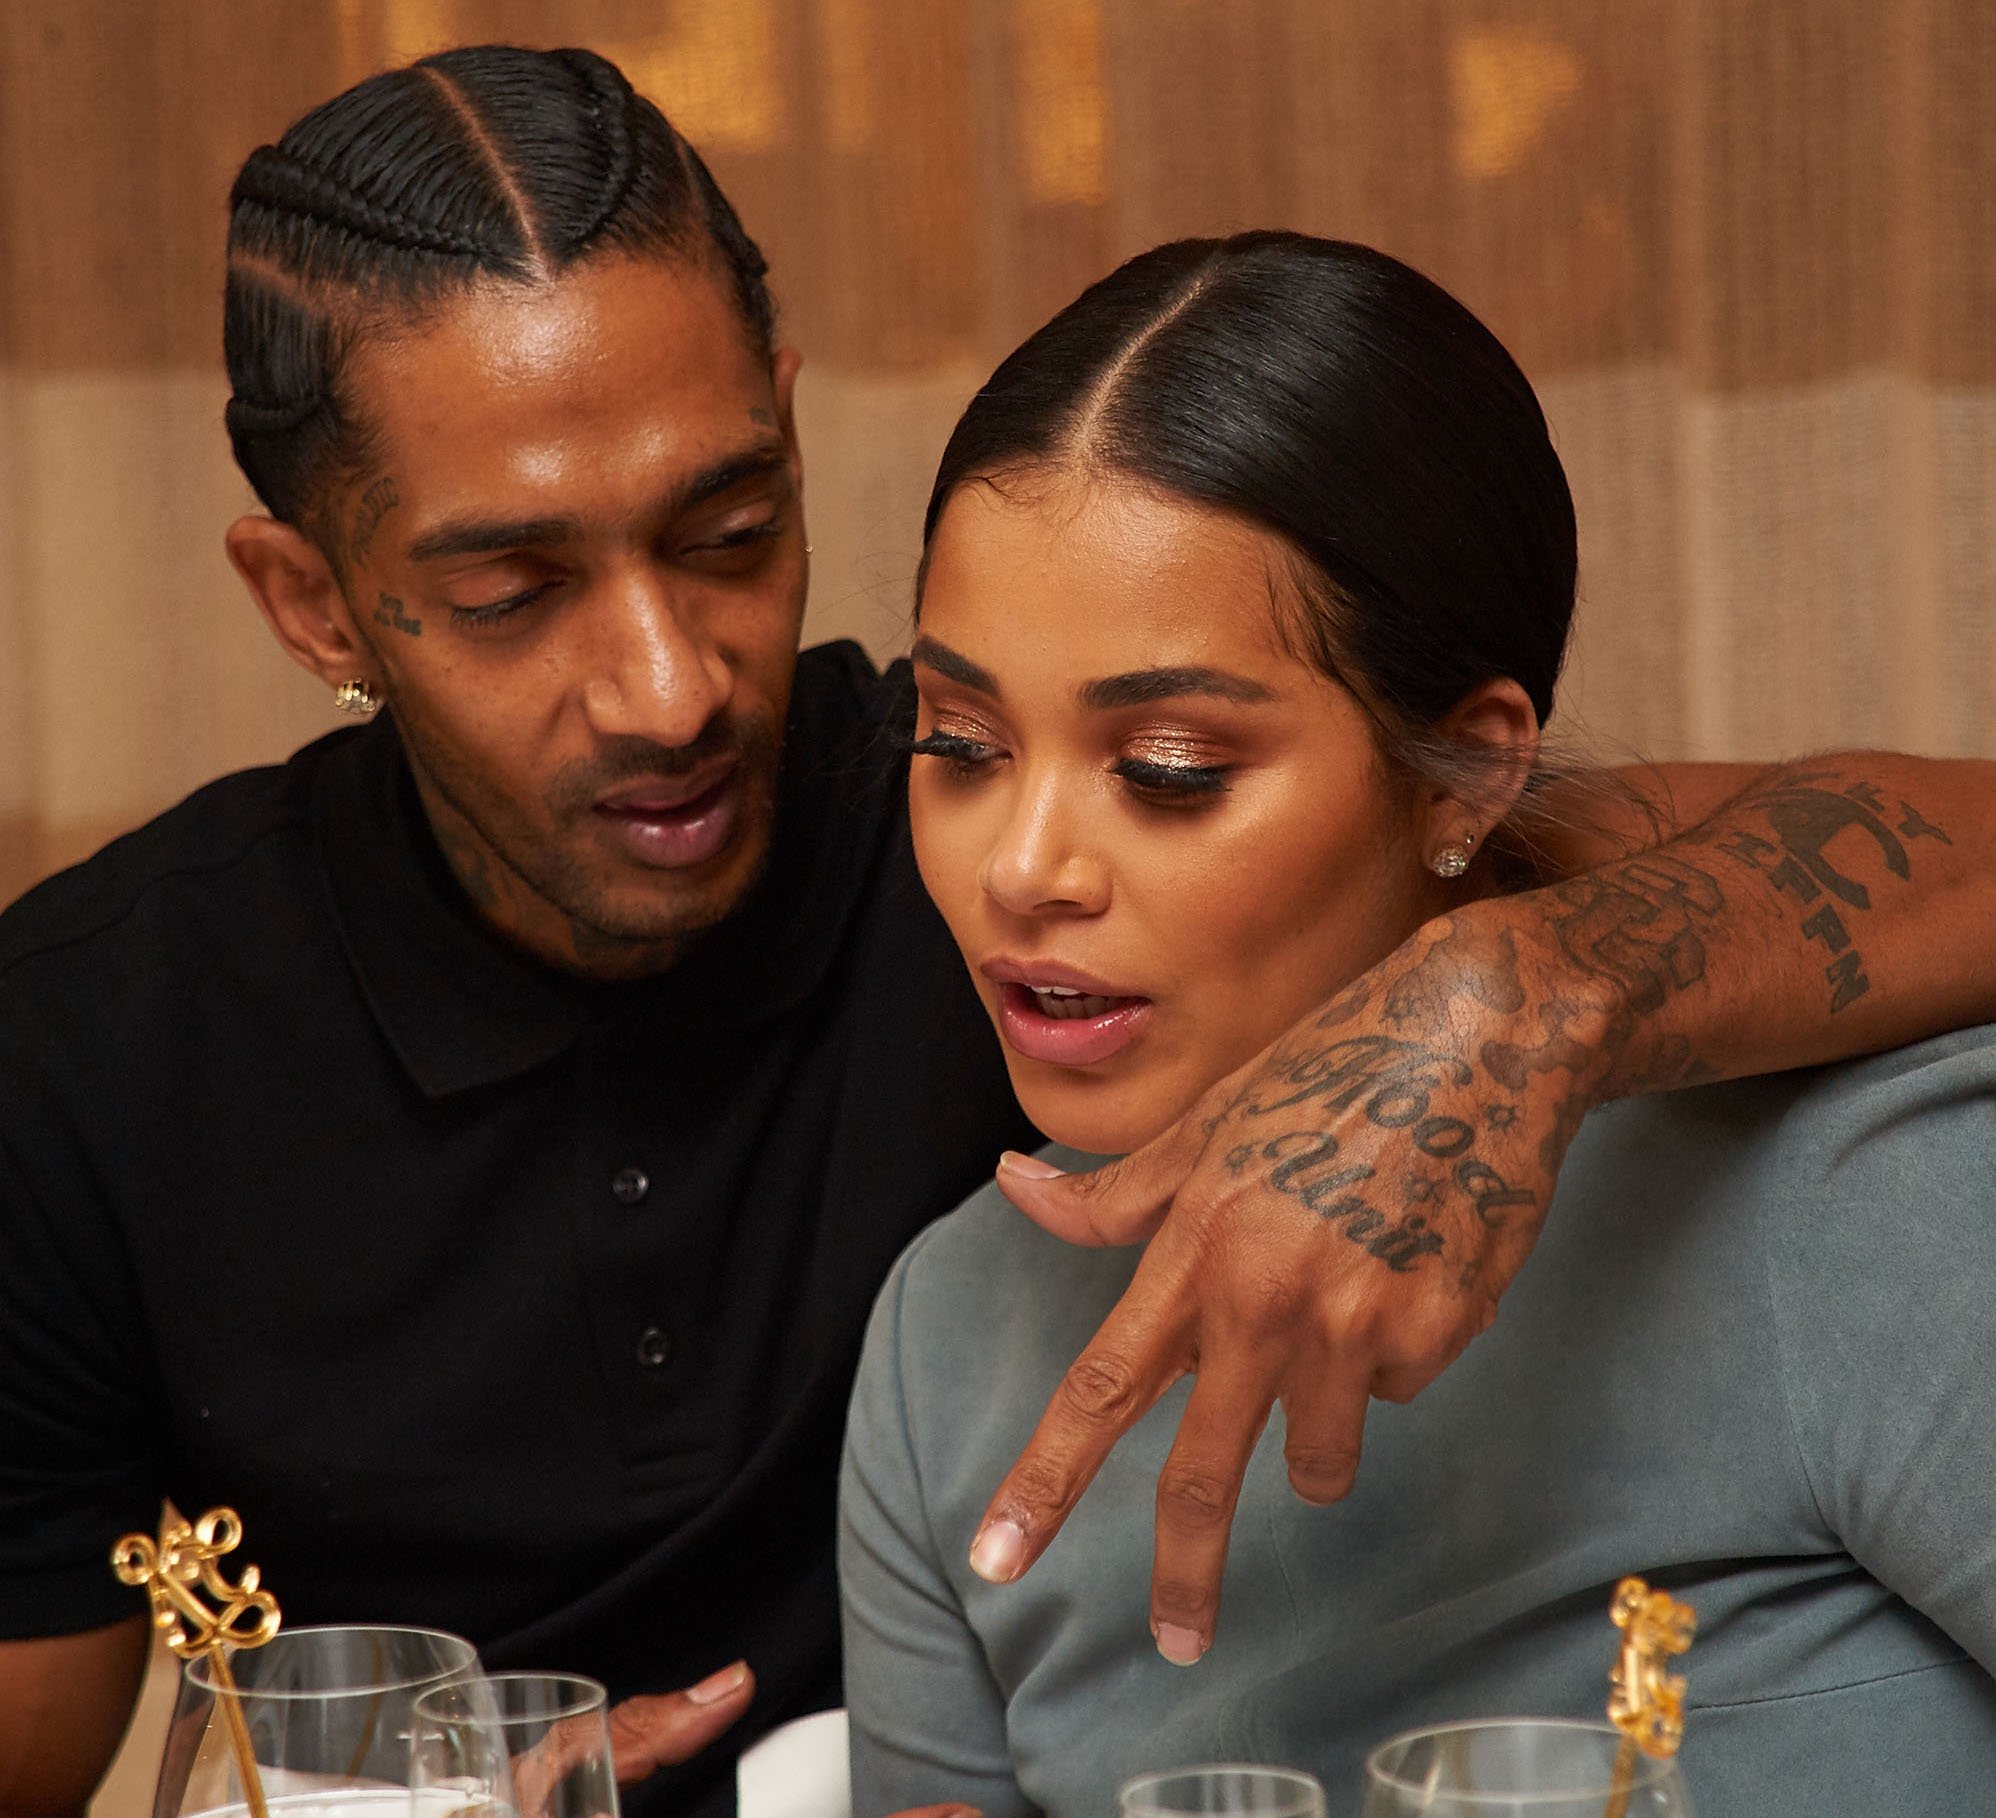 Nipsey Hussle and Lauren London embrace in photo; London says she felt God dropped the ball on her after Hussle's death